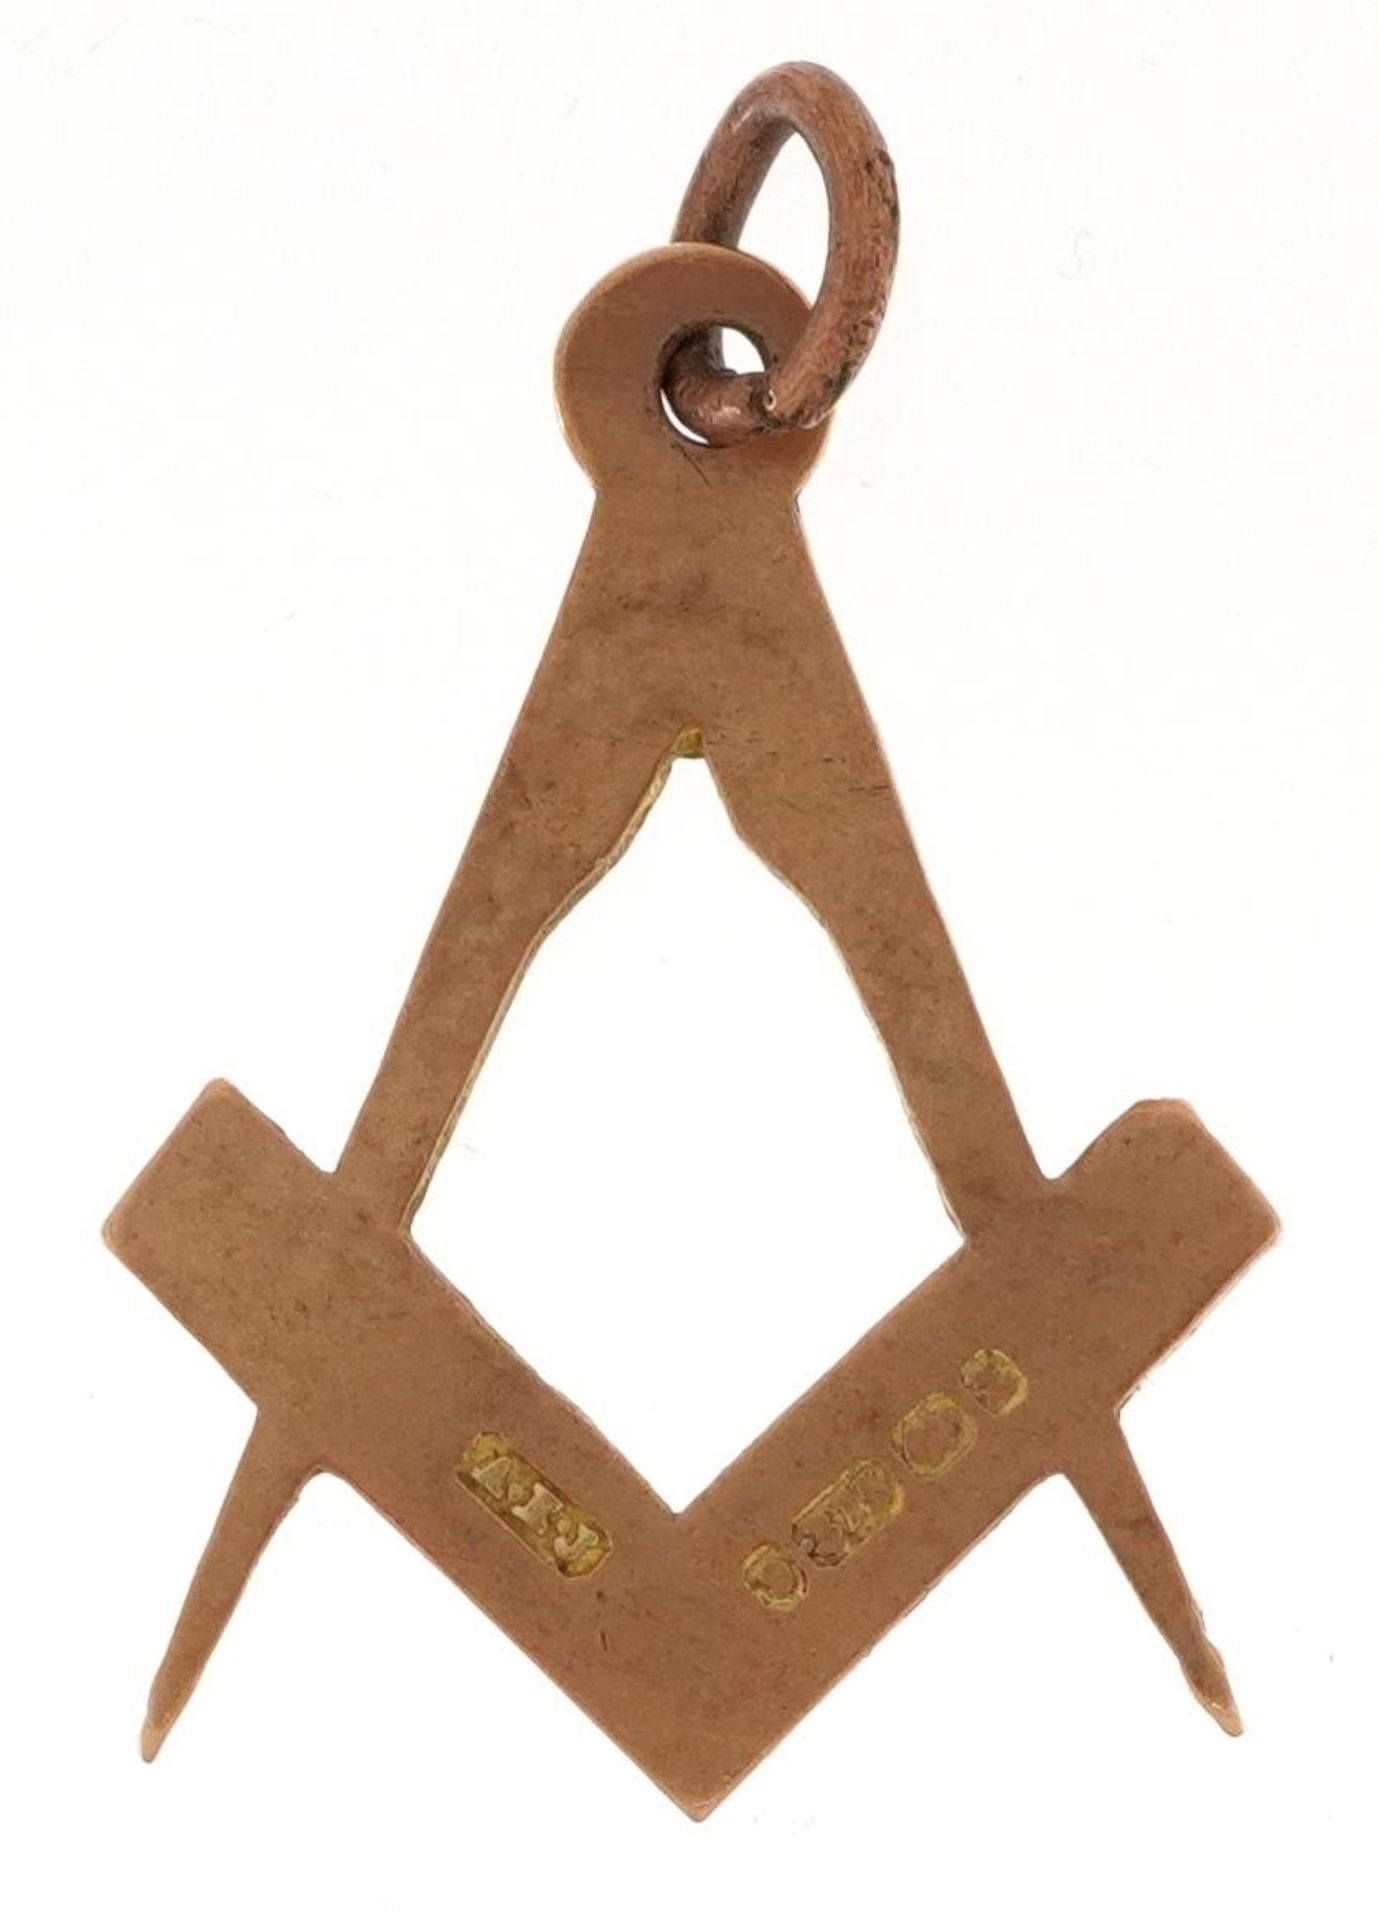 9ct gold masonic charm, 2.9cm high, 1.6g : For further information on this lot please visit - Image 2 of 3